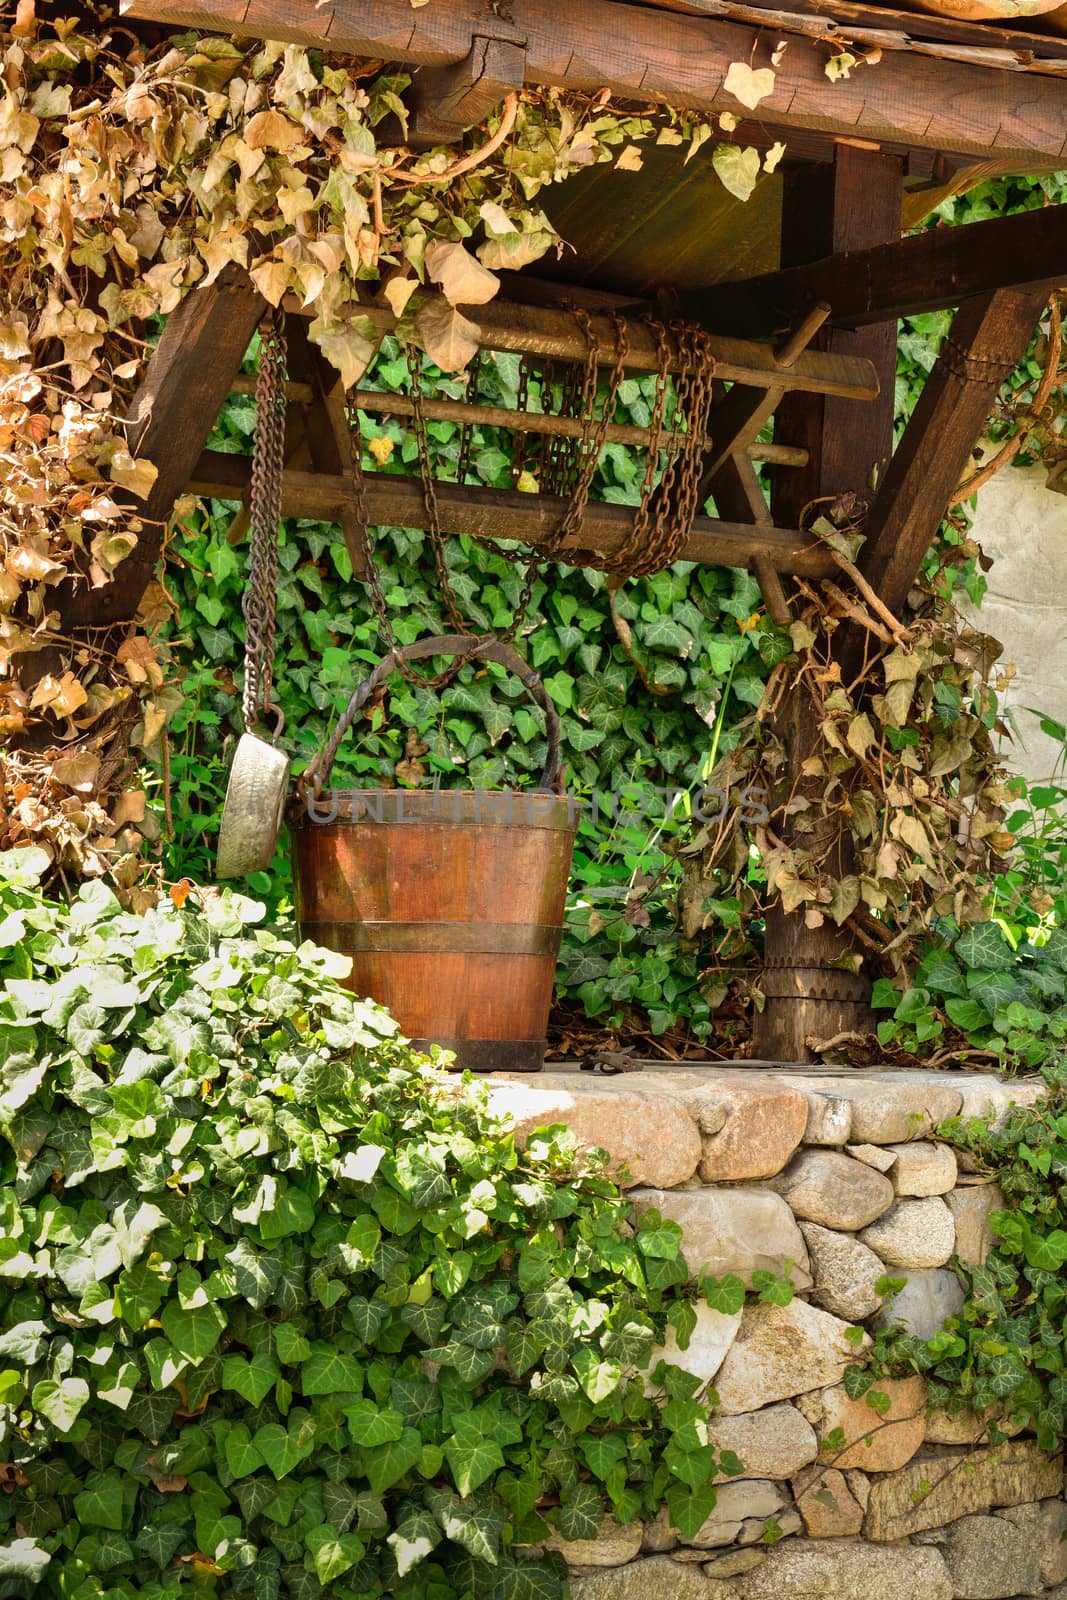 Old water well and a wooden bucket among ivy leaves by velislava